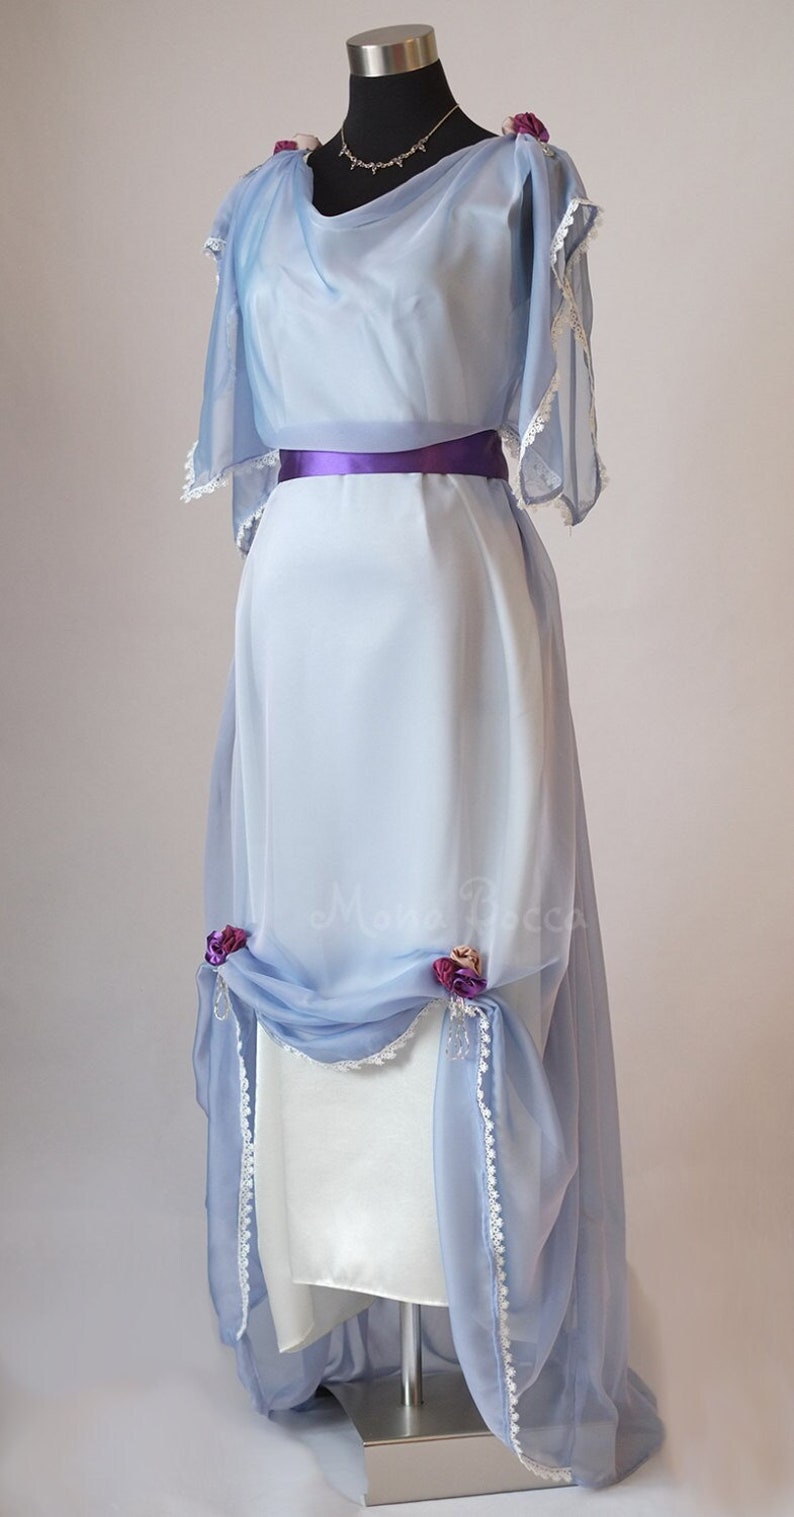 1900s Edwardian Dress, 1910s Dresses and Gowns     Edwardian light blue evening dress Gilded Age Downton Abbey inspired Titanic styled dress Made in England  AT vintagedancer.com